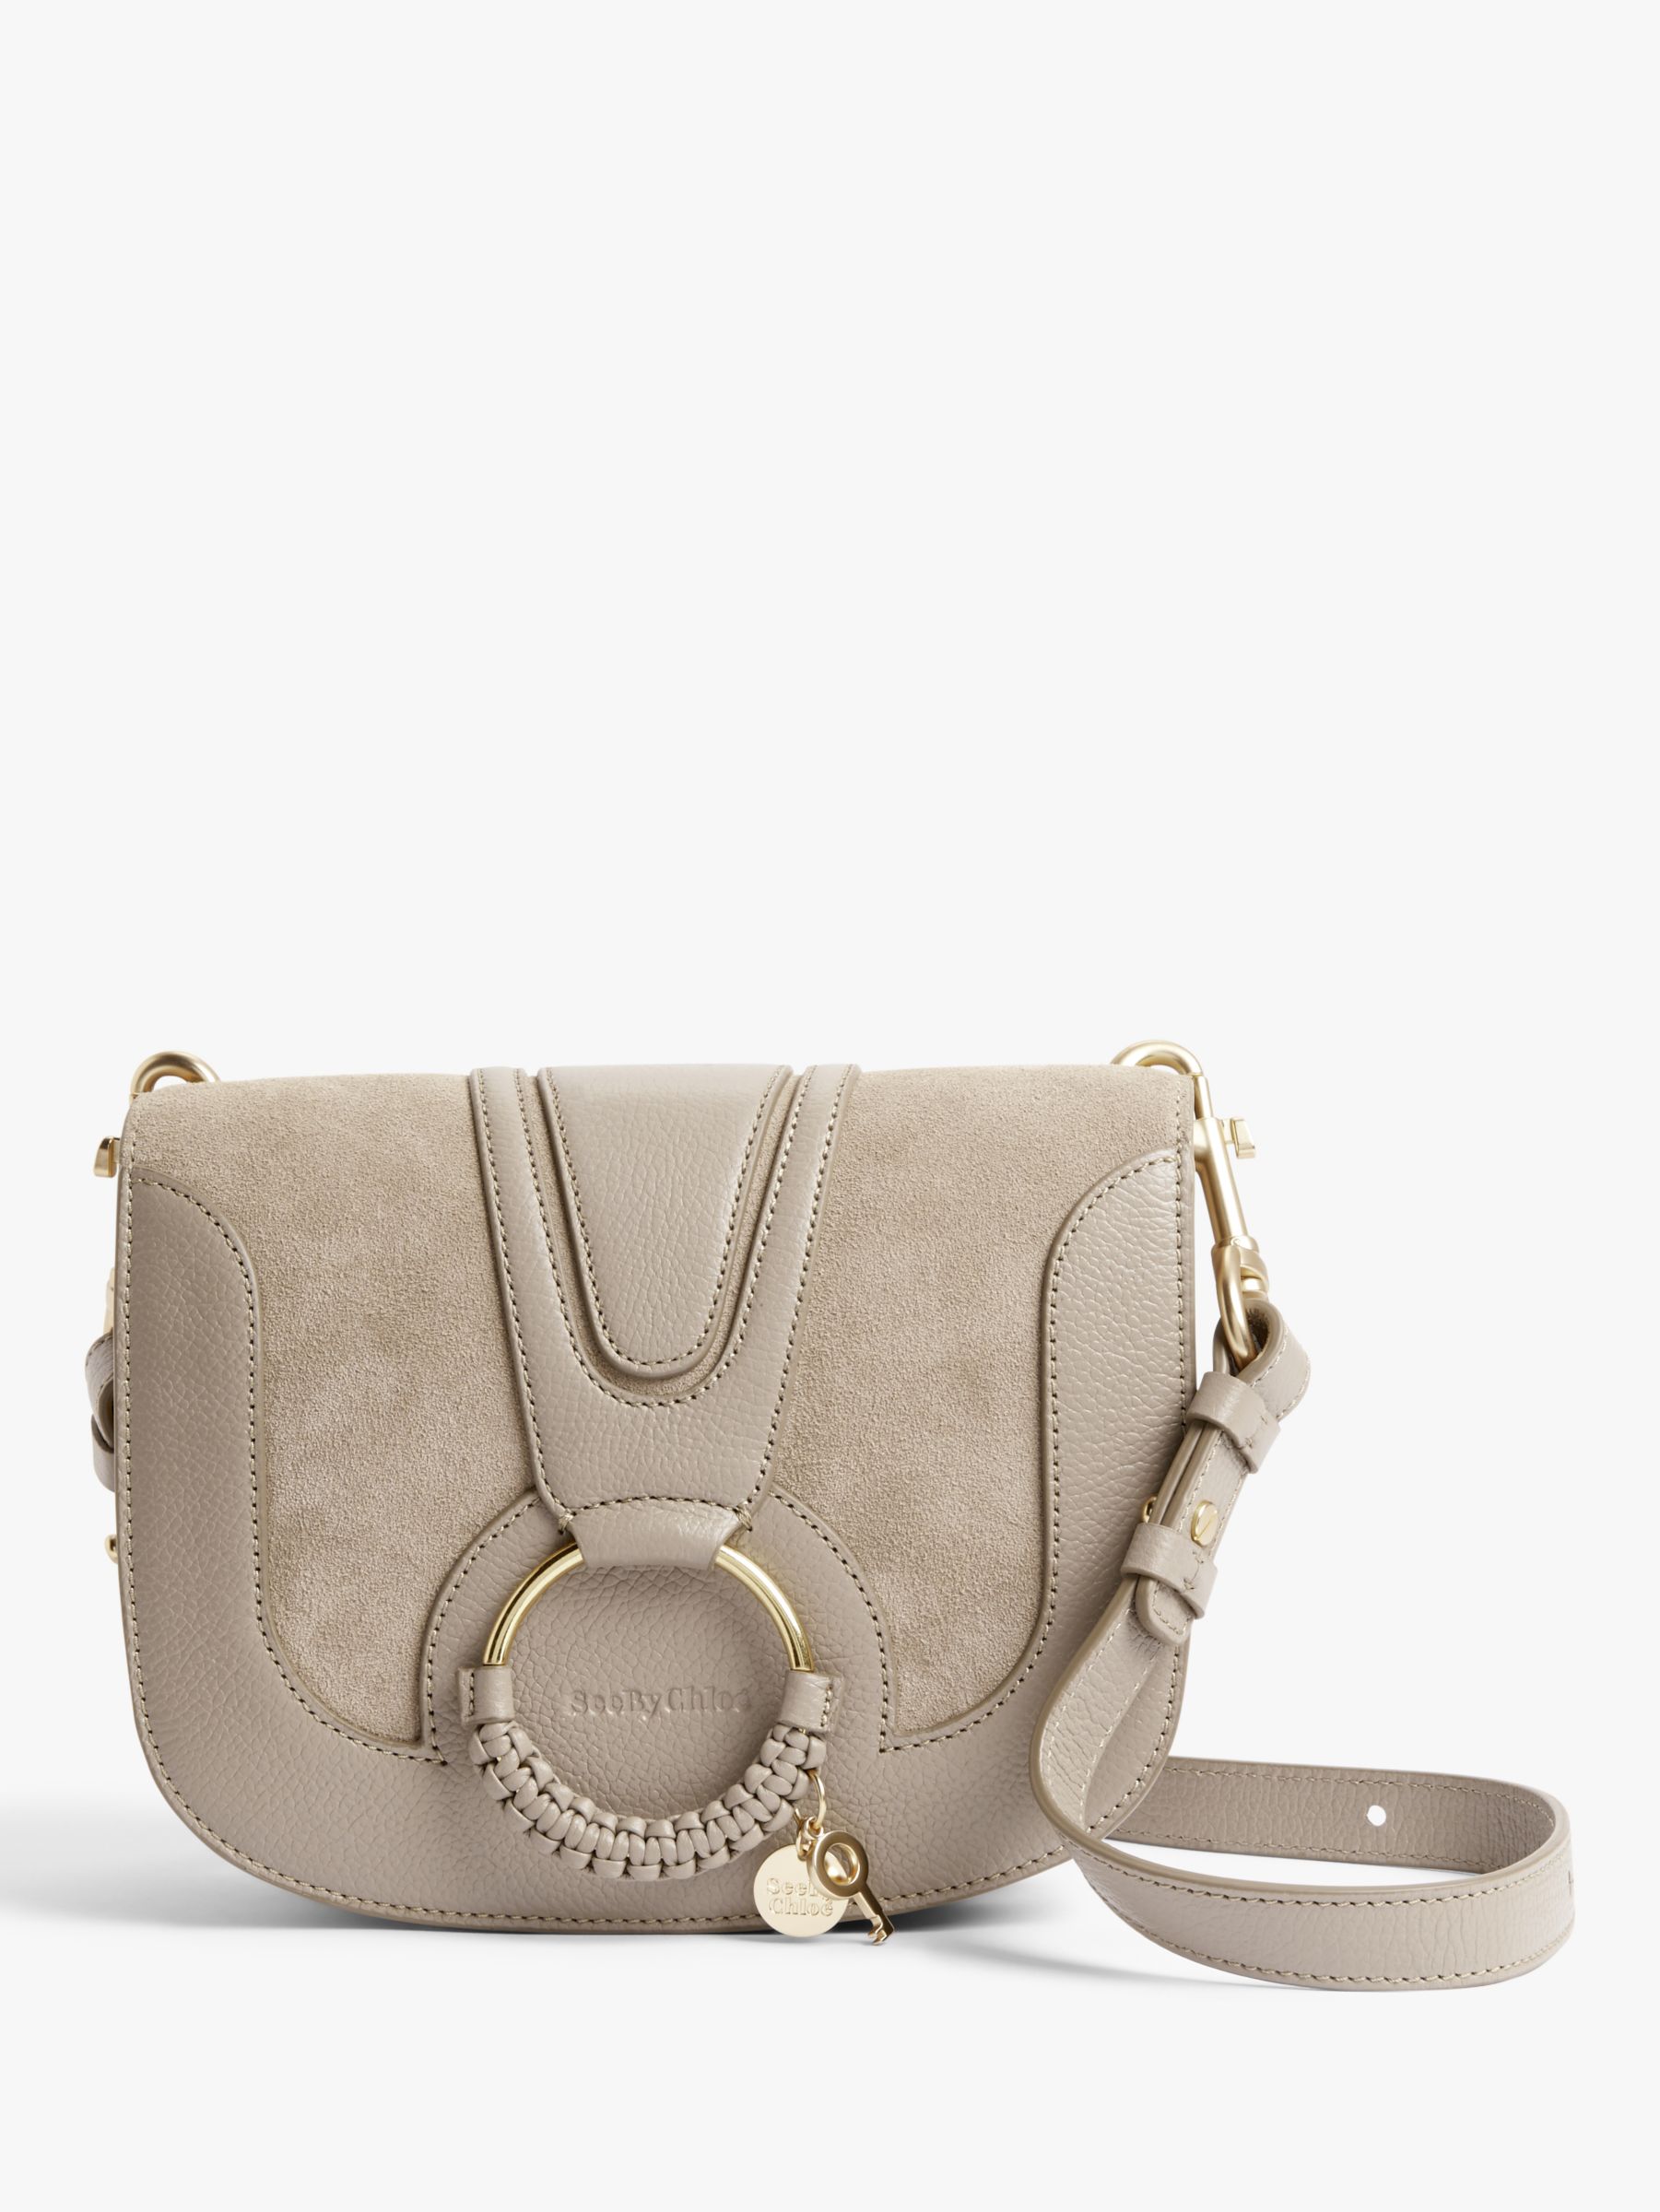 See By Chloé Small Hana Suede Leather Satchel Bag, Motty Grey at John ...